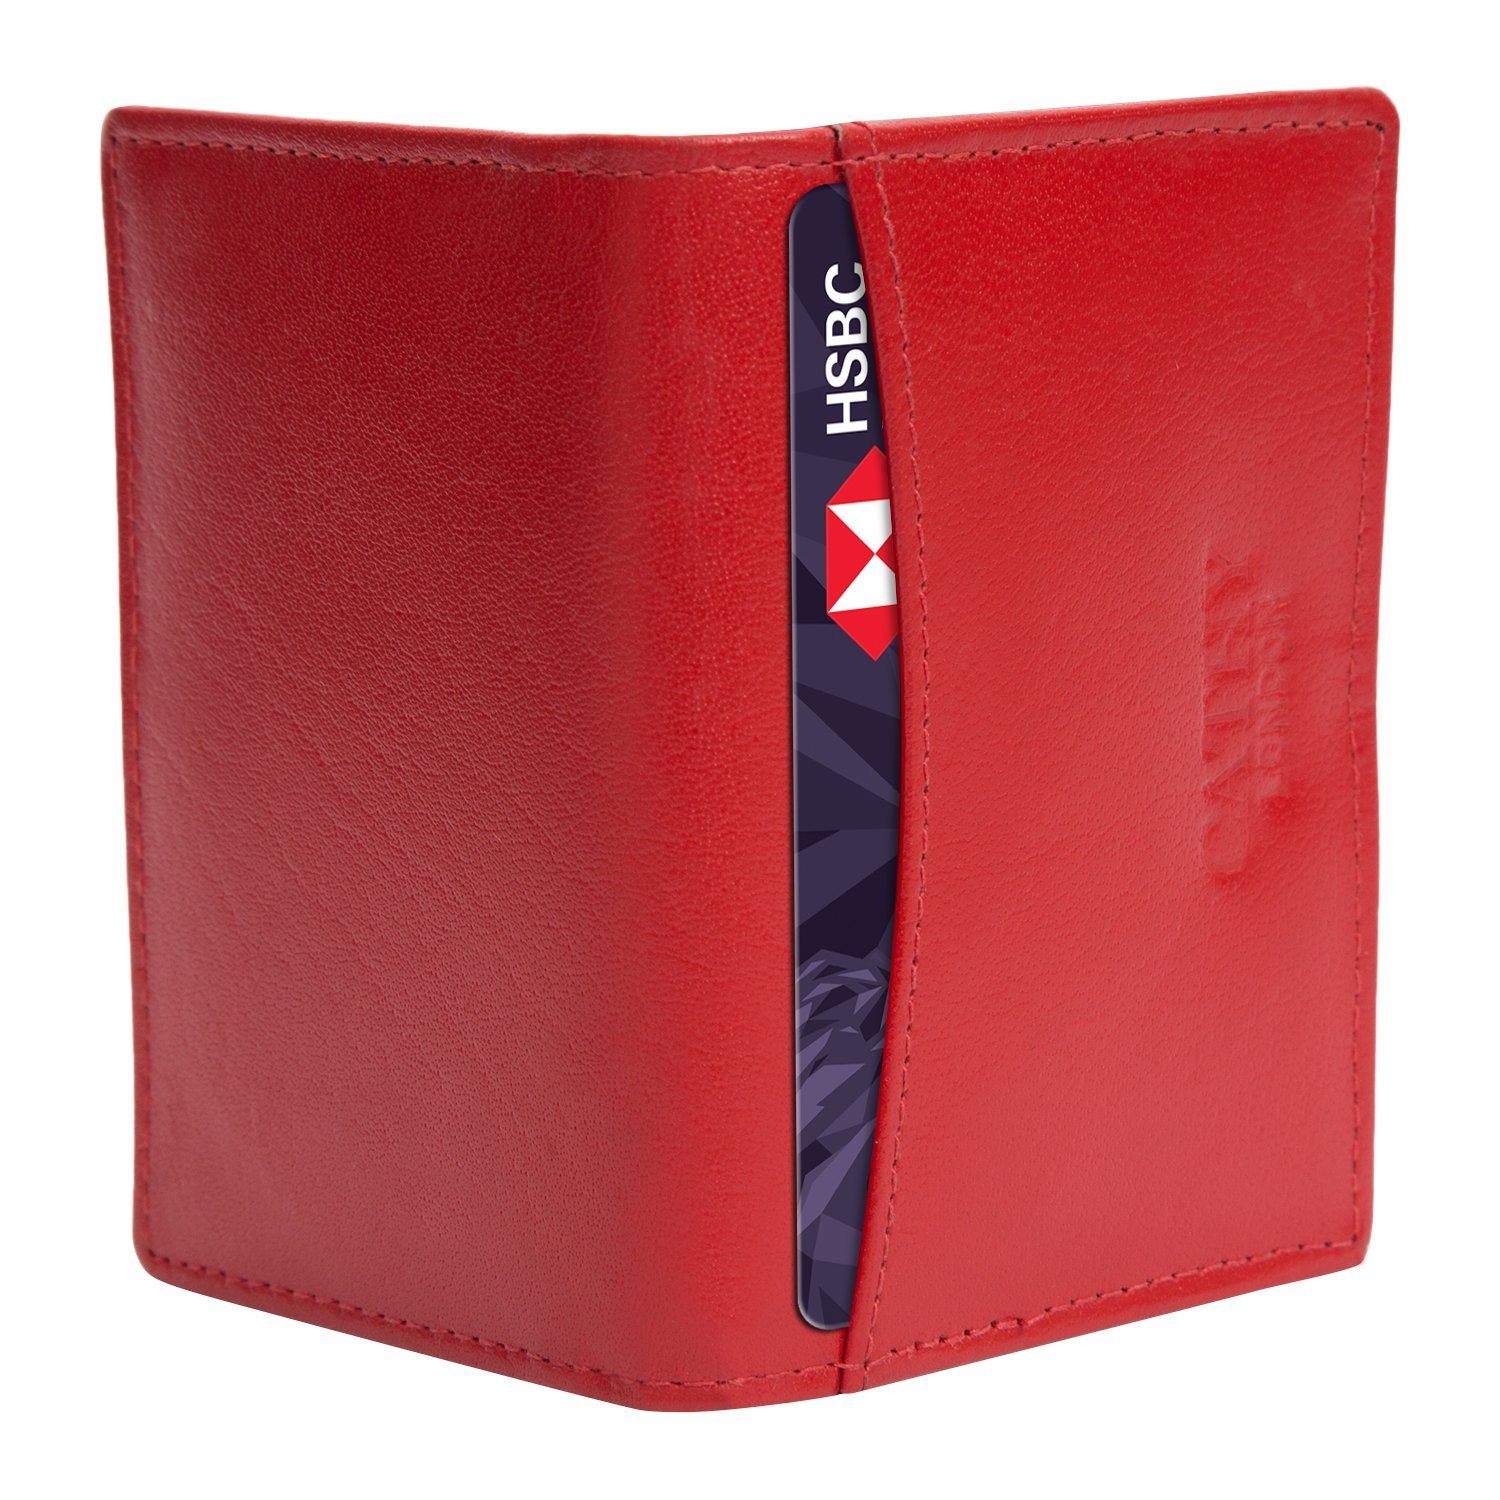 Red Colour Bi-Fold Italian Leather Card Holder/Slim Wallet (Holds Upto 10 Cards + 1 ID Slot) Cathy London 